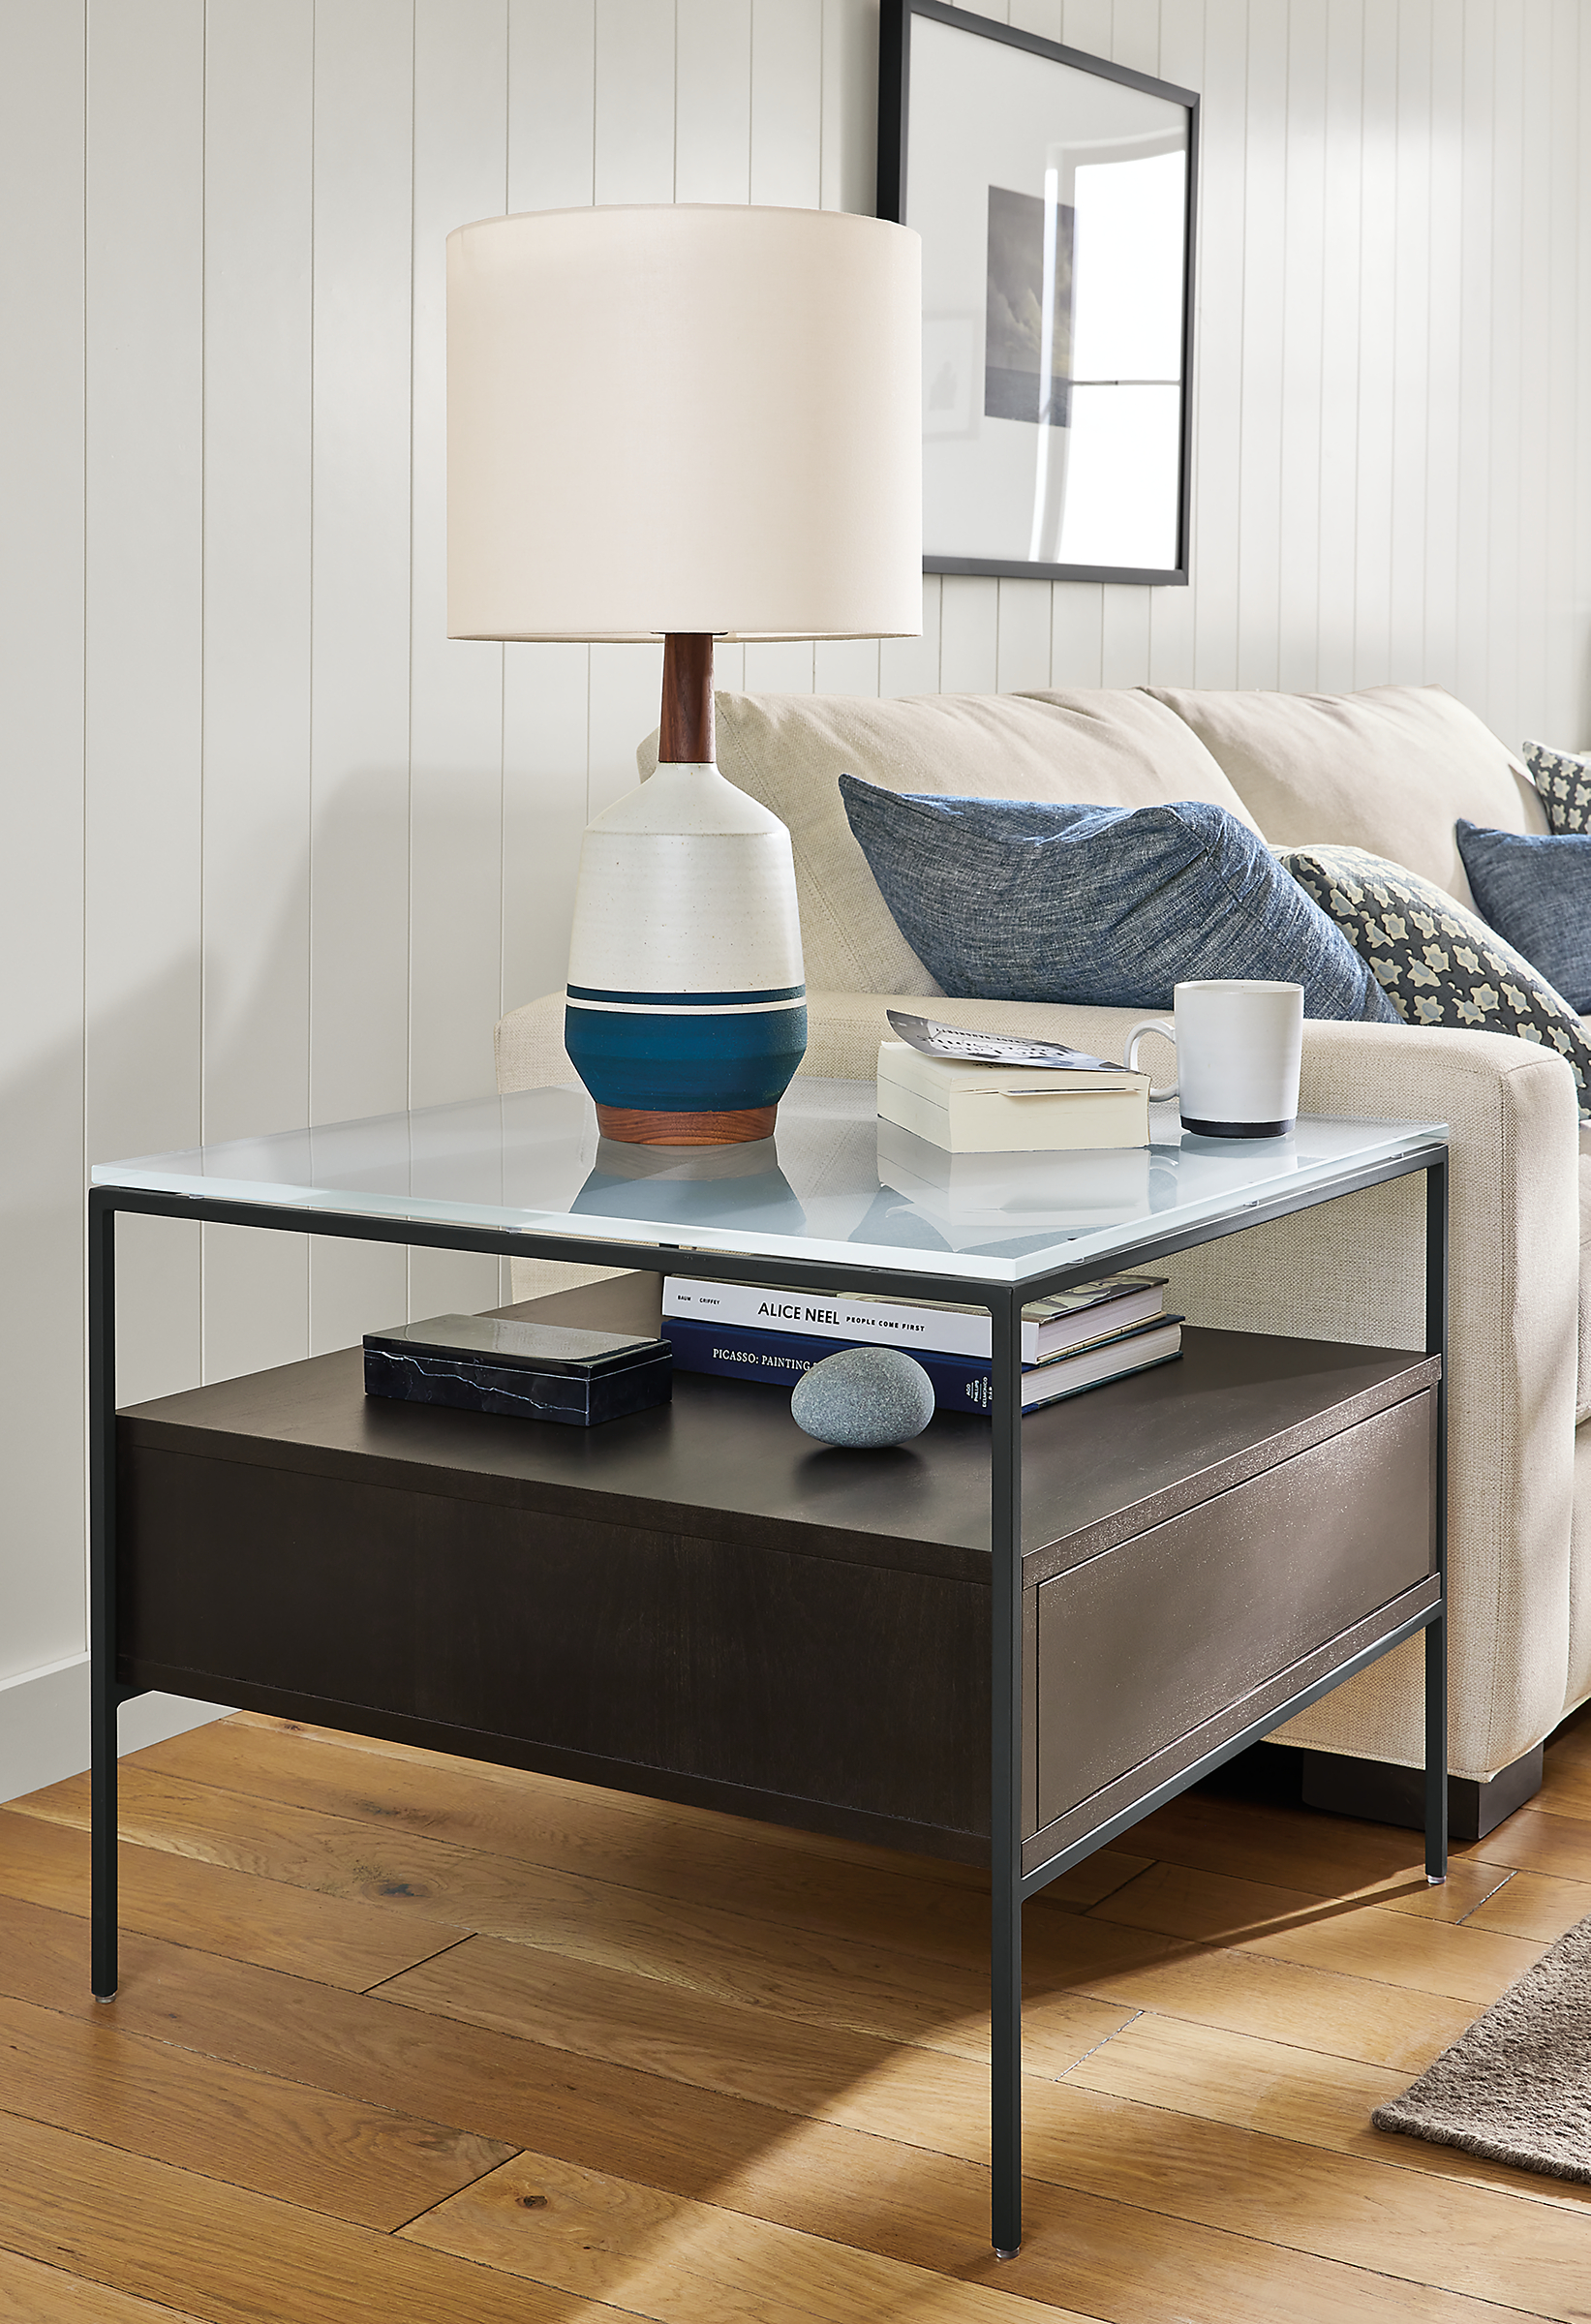 Living area with Williams end table in charcoal with satin etched glass top and Meriden table lamp in white and blue.